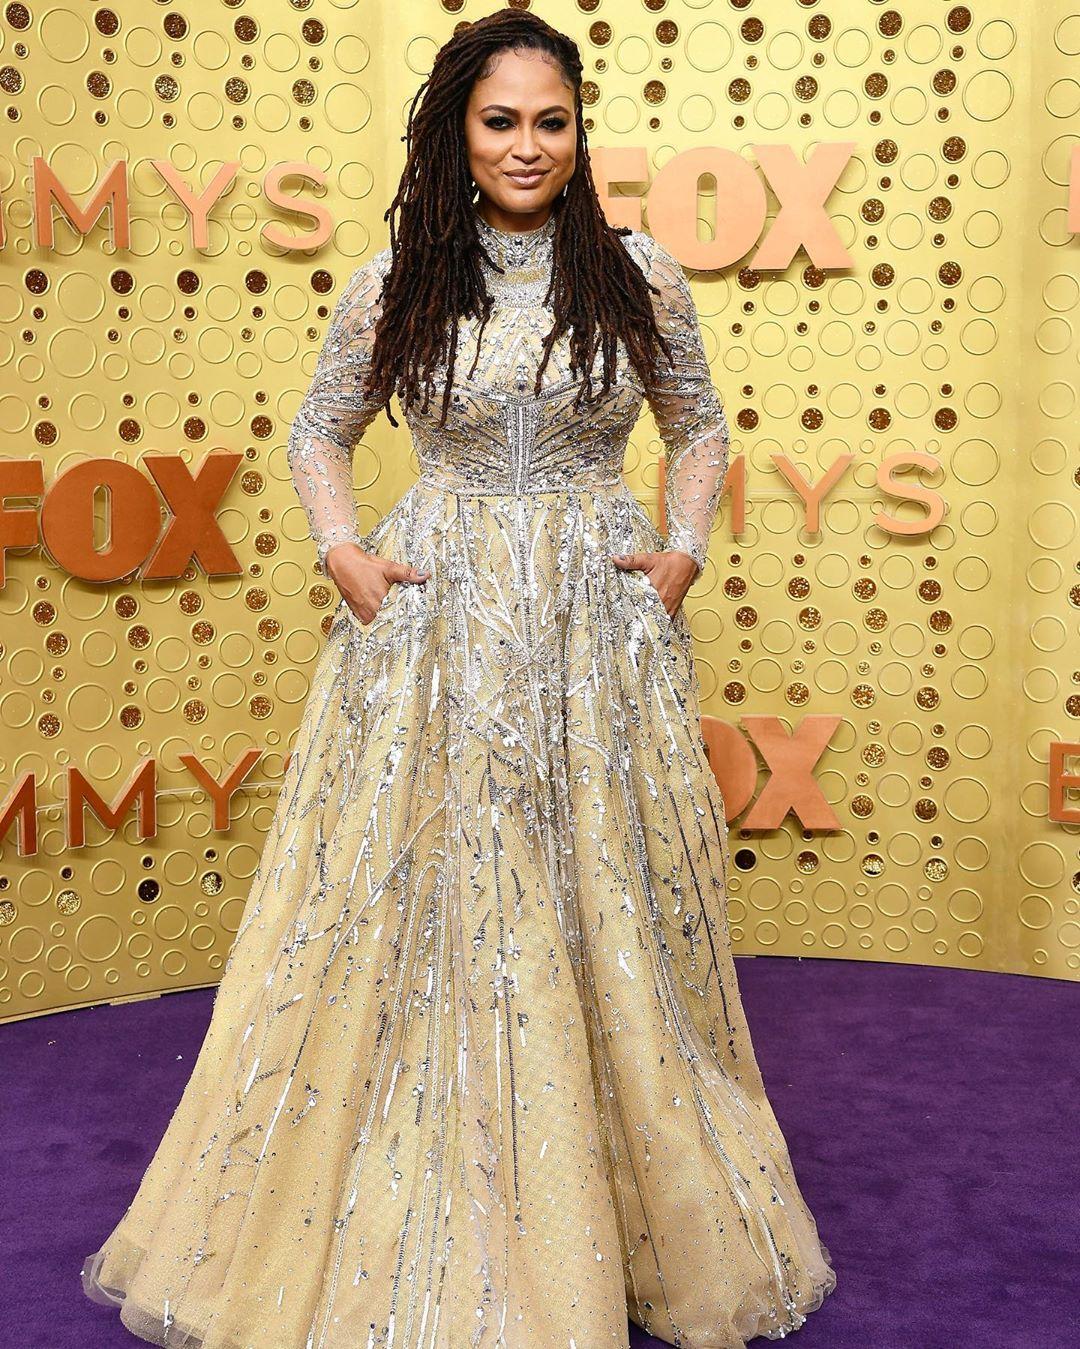 ava duvernay-Getty Images